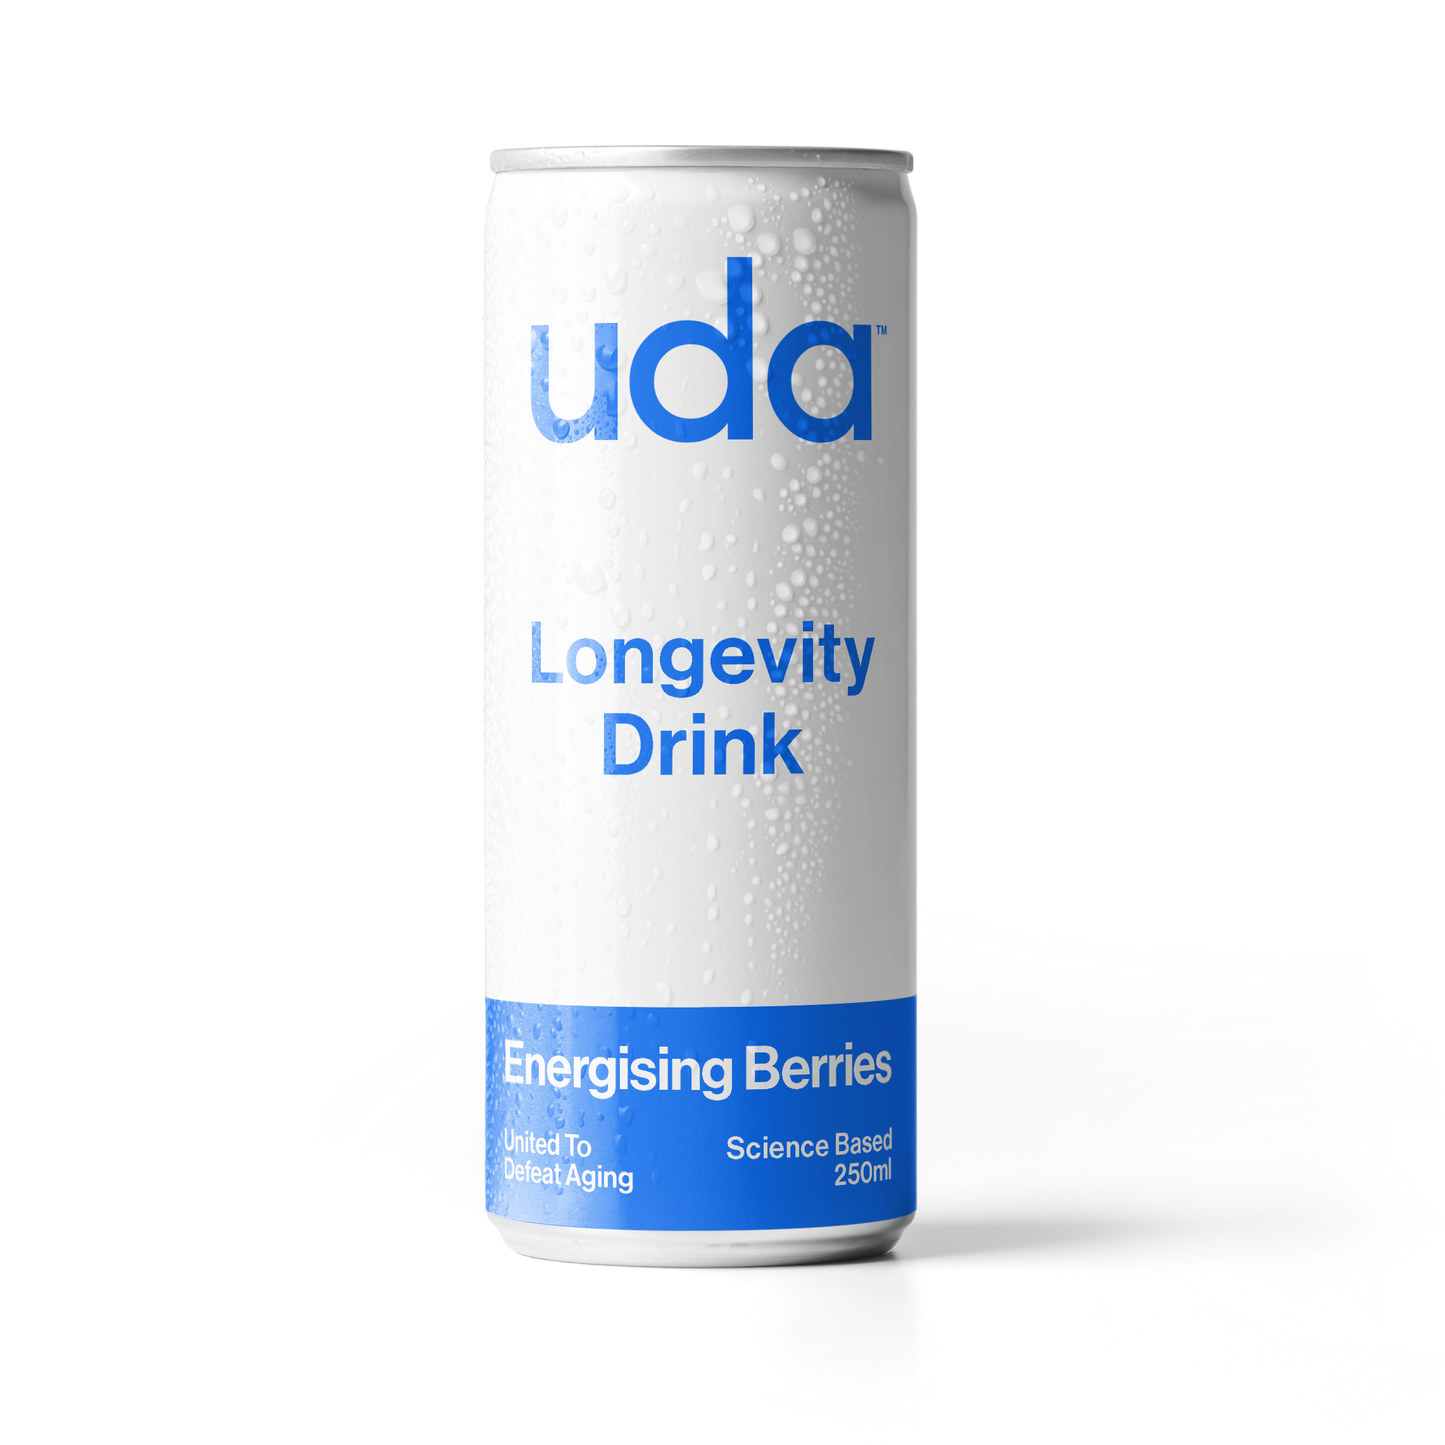 Energising Berries Longevity Drink (24 cans per box) (Delivery available in the UK only)